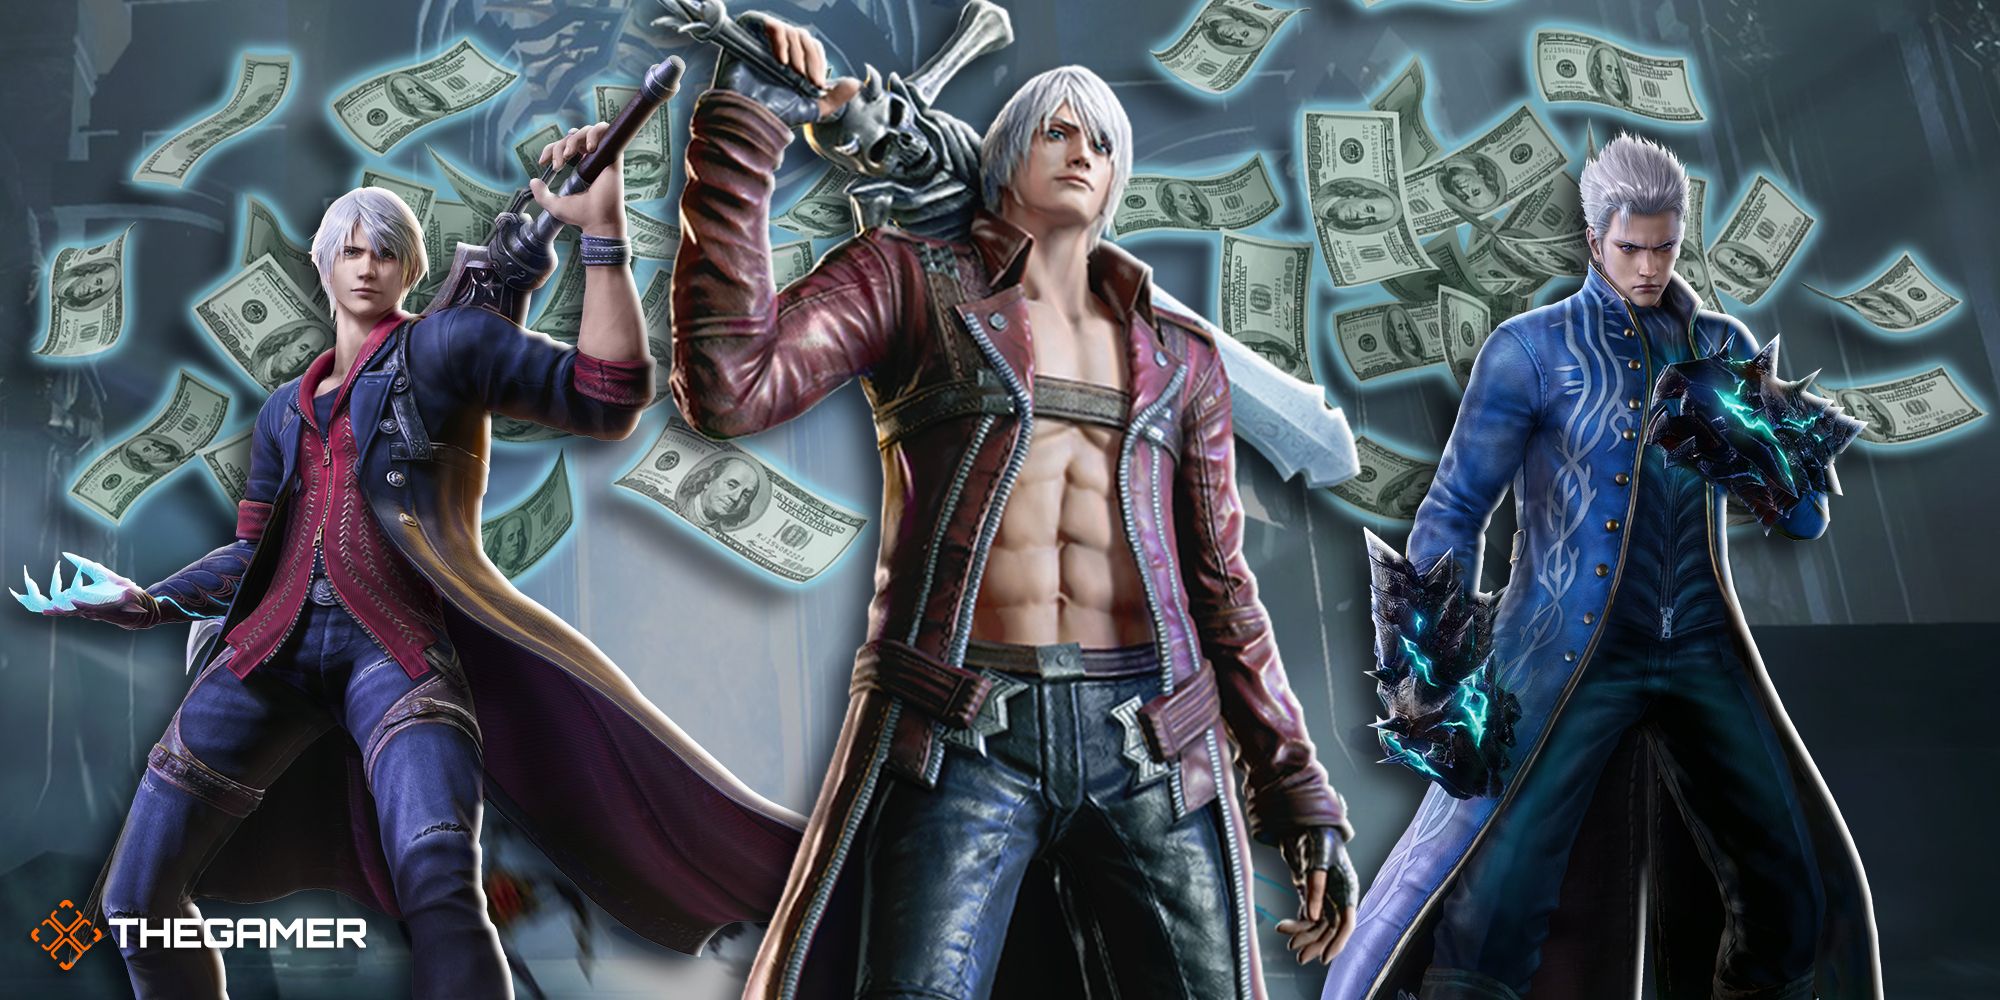 Believe it or not, there's a new Devil May Cry game launching in January